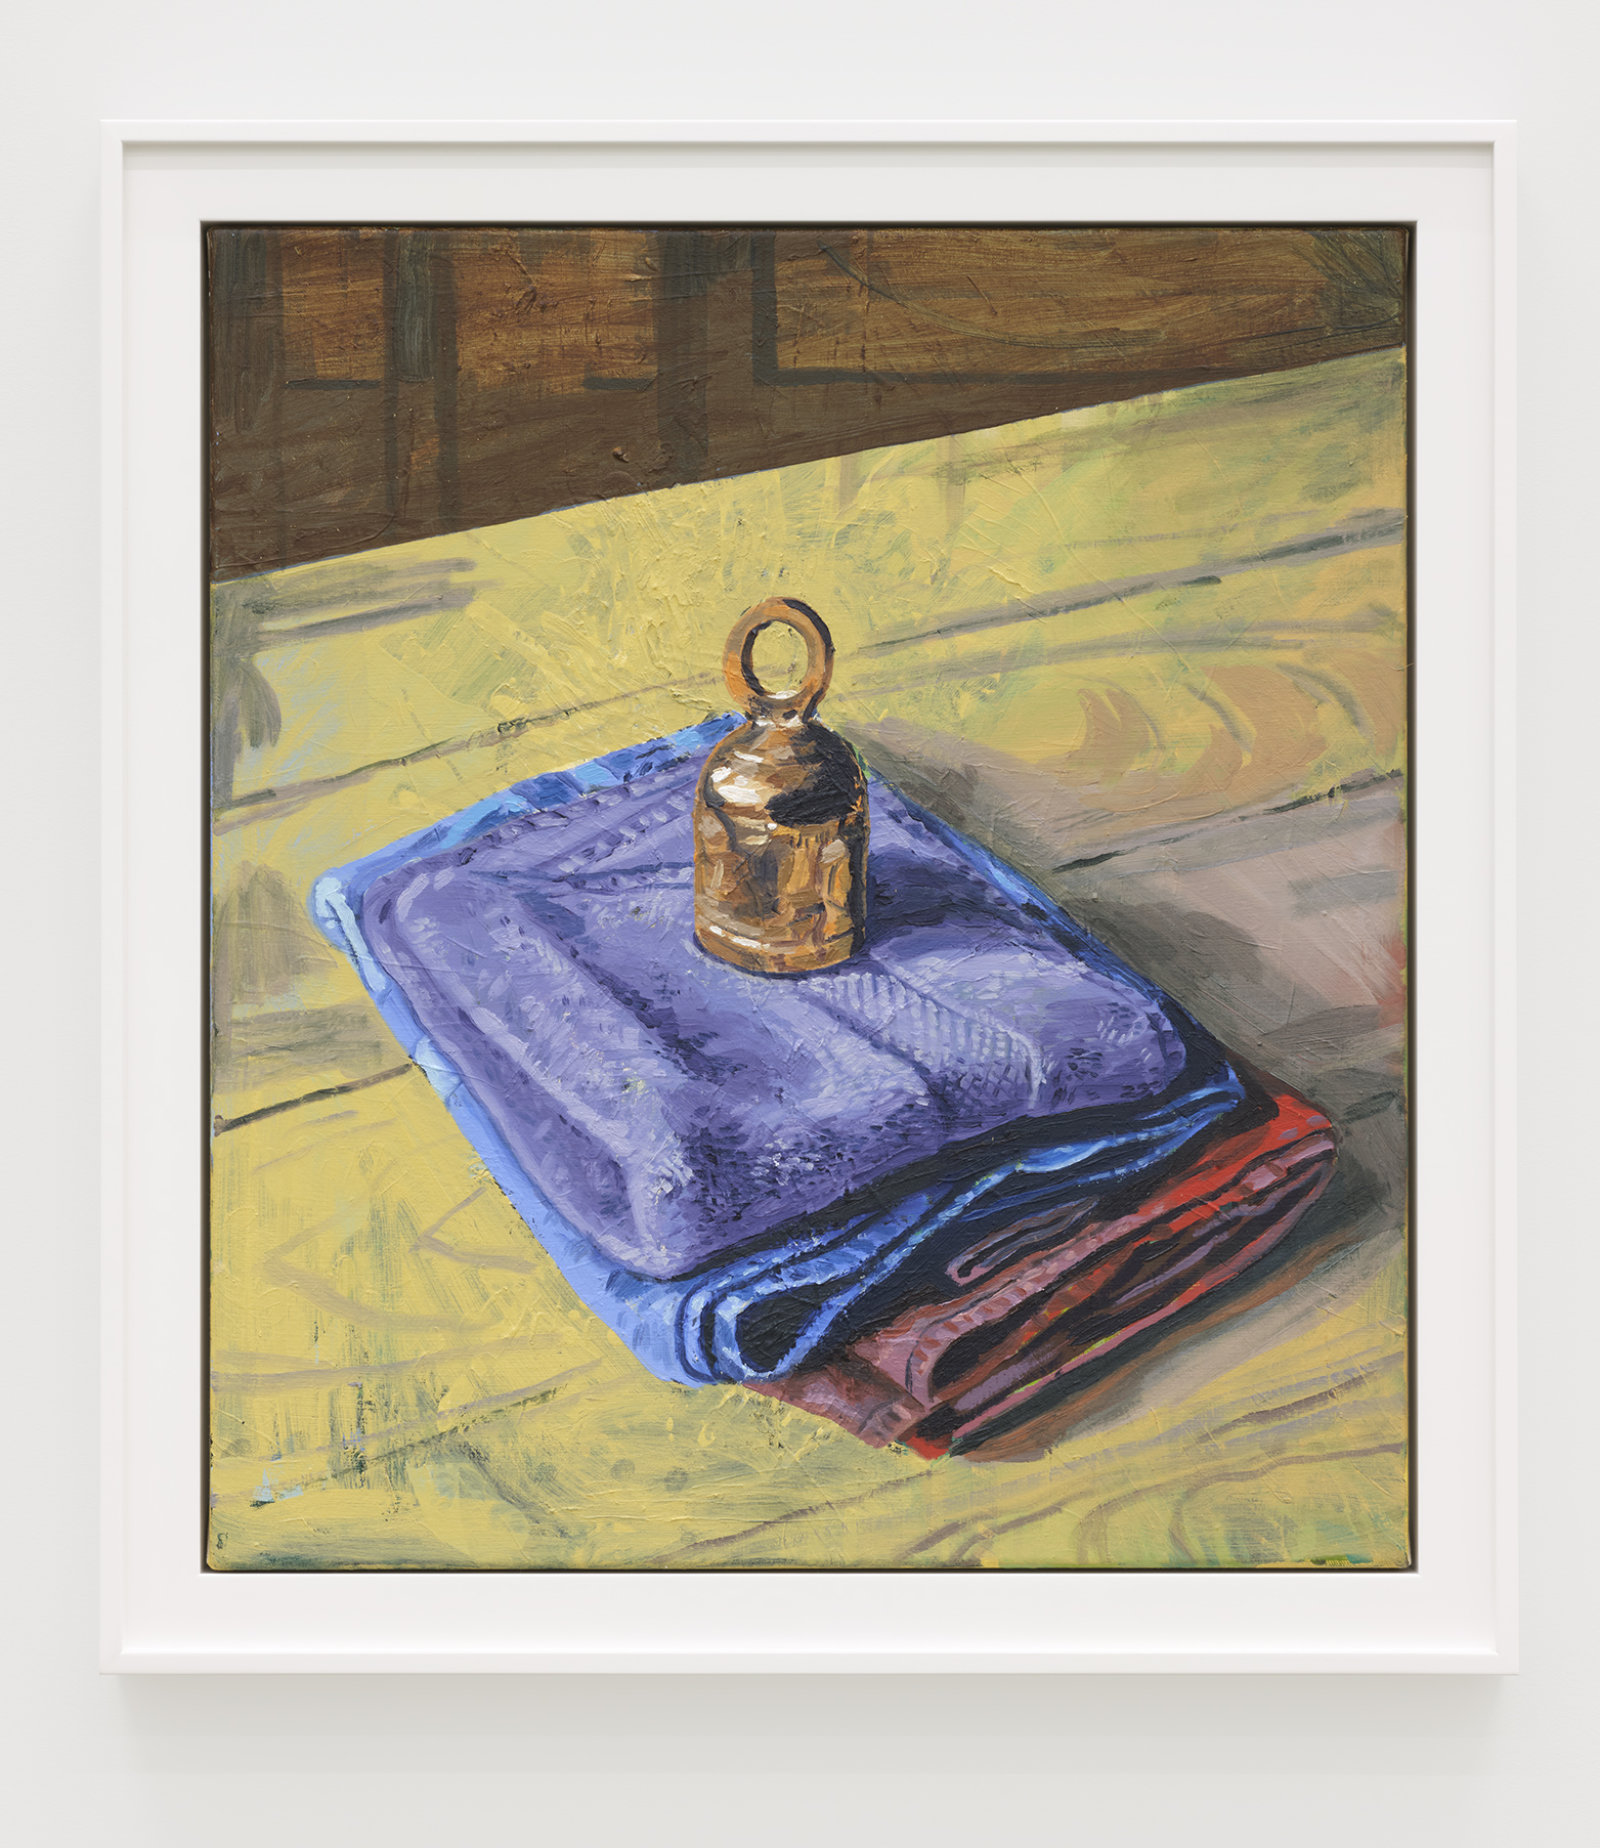 Damian Moppett, Bell and Towels, 2020, oil on canvas, 30 x 27 in. (76 x 69 cm)